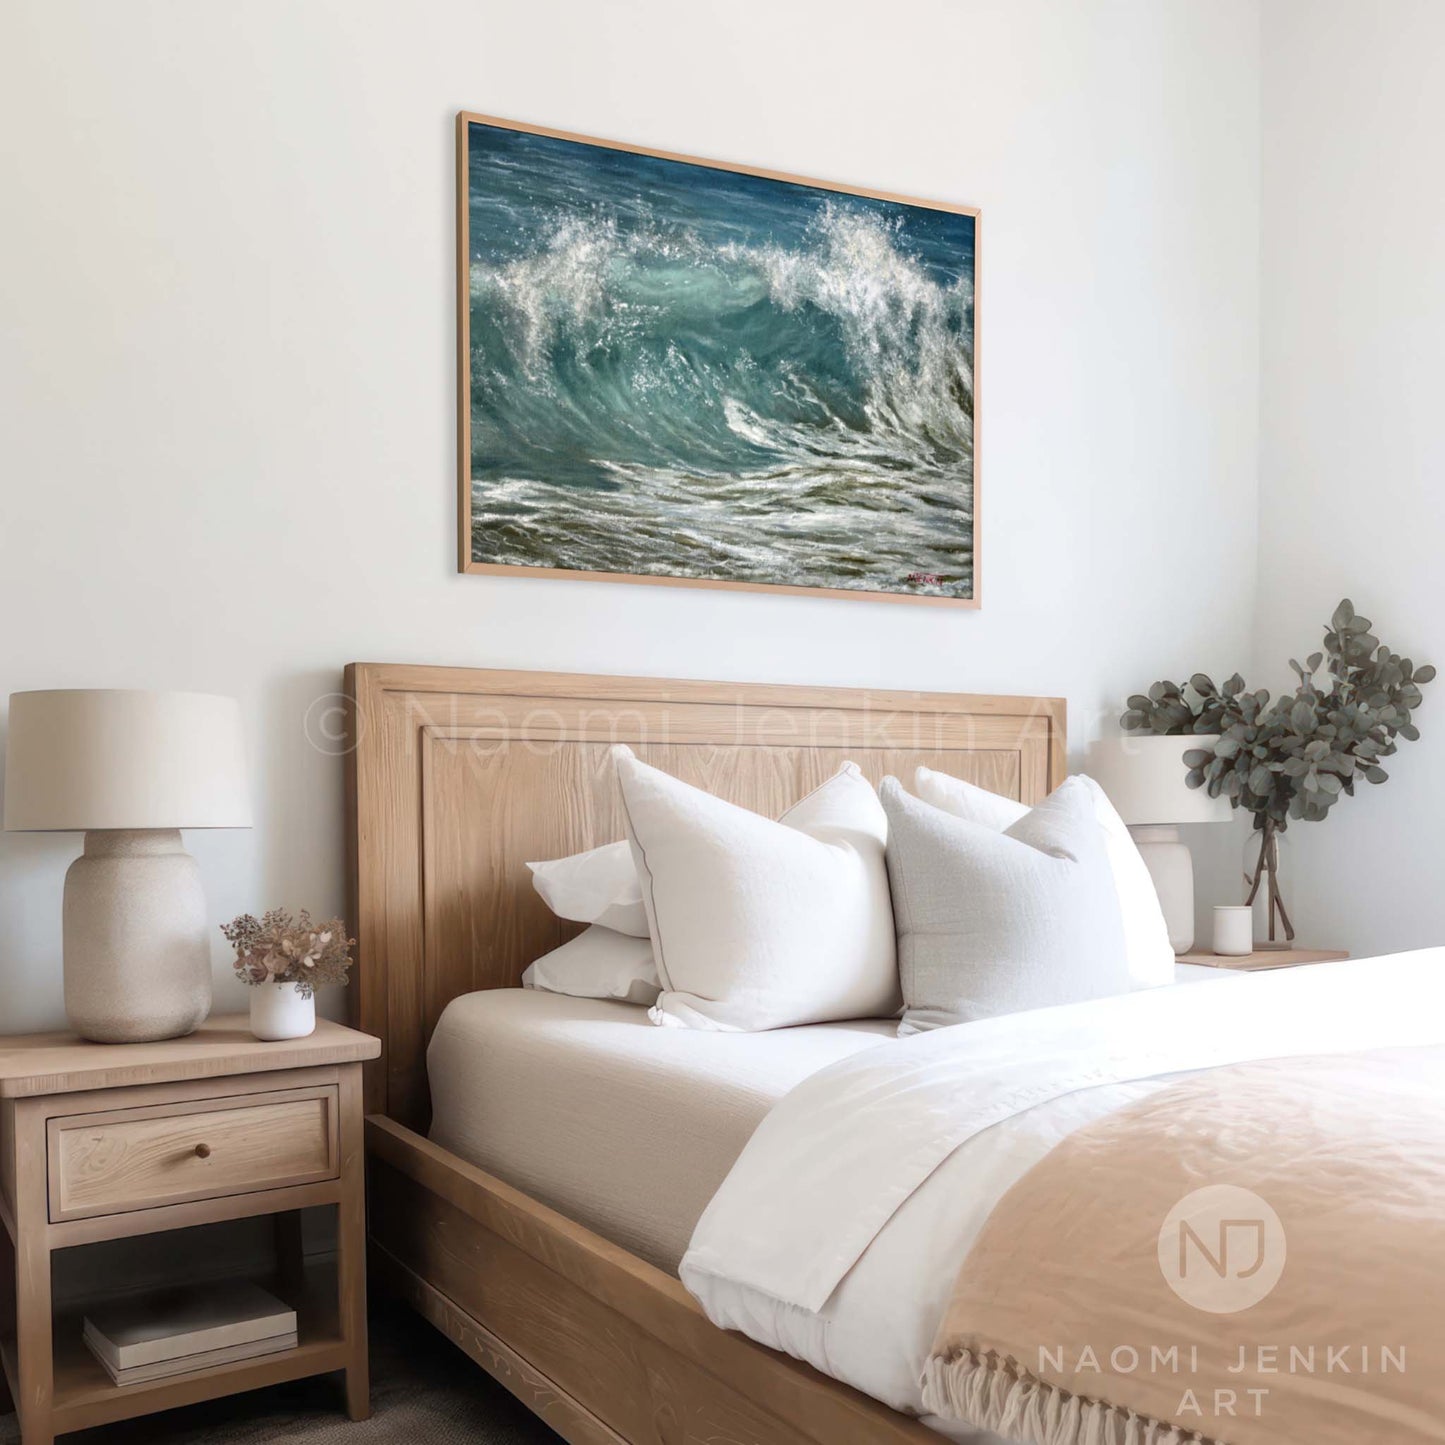 'Churning Water' seascape print in a bedroom setting